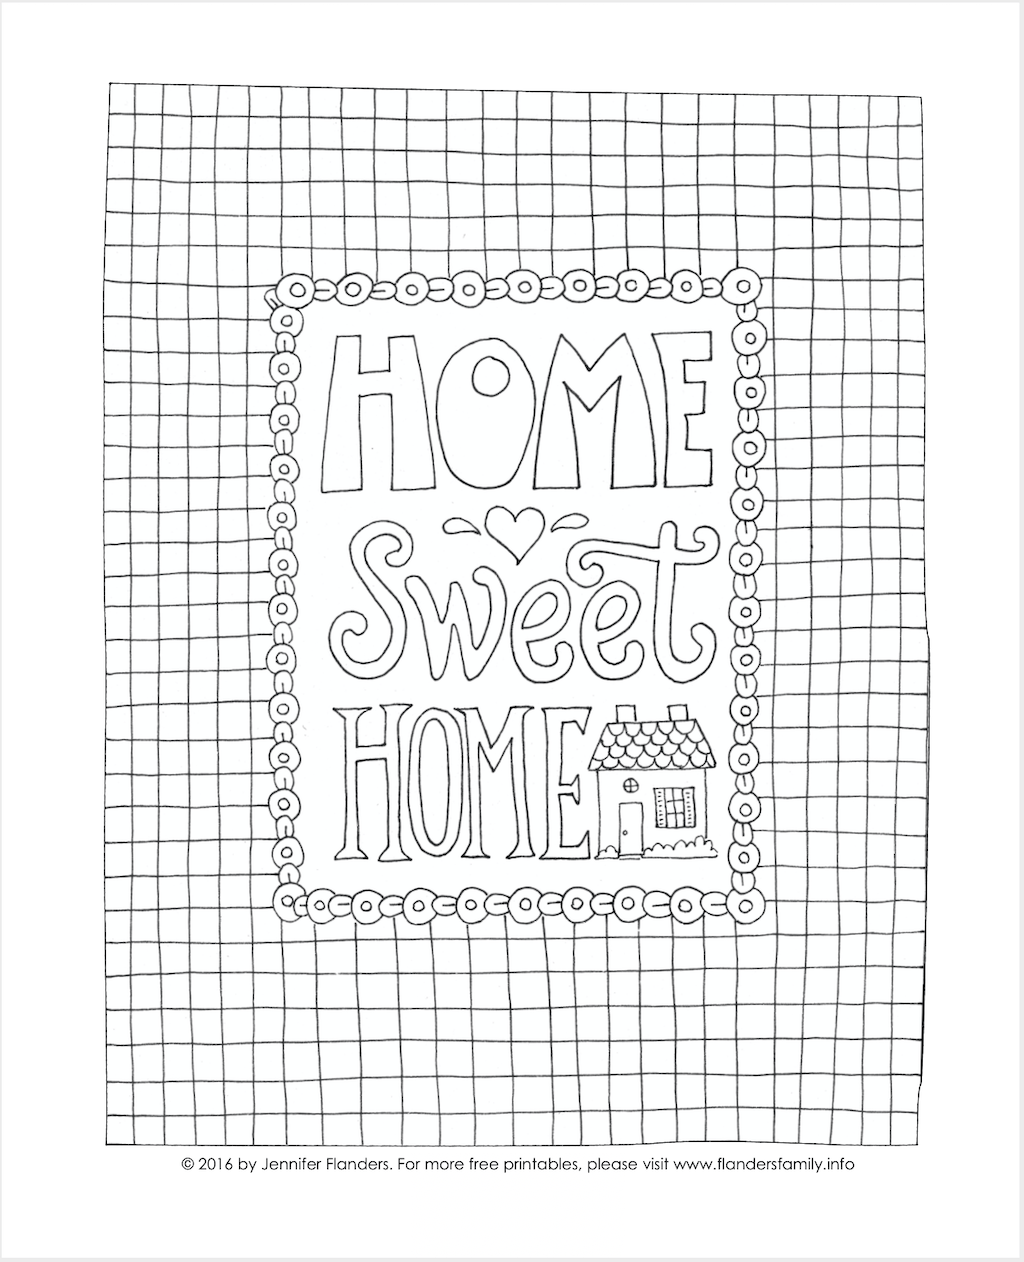 Home sweet home coloring page